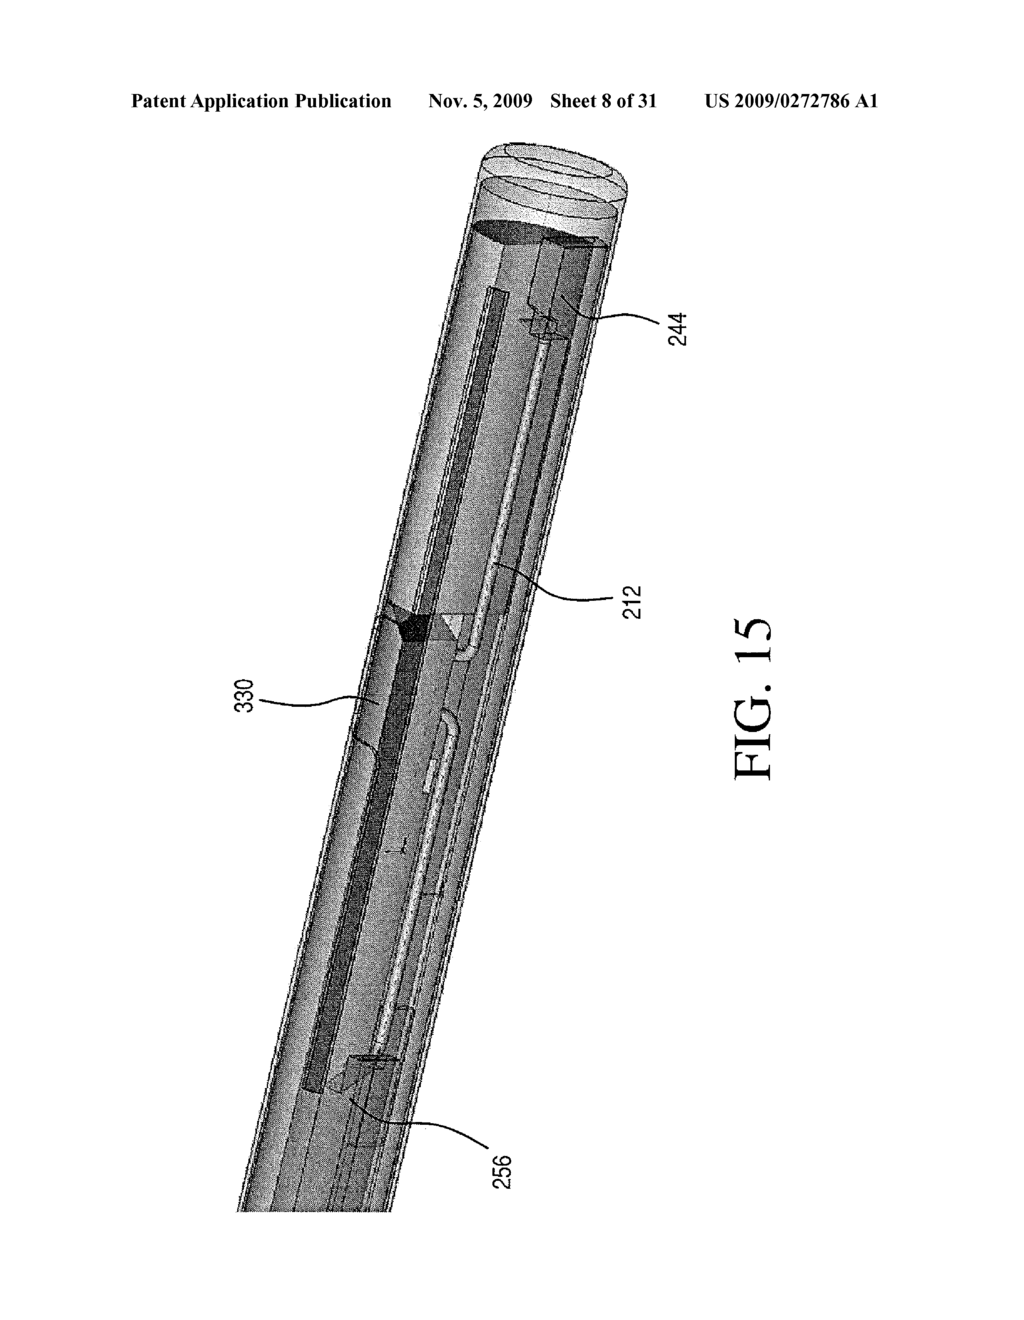 SURGICAL STAPLING INSTRUMENT FOR APPLYING A LARGE STAPLE THROUGH A SMALL DELIVERY PORT AND A METHOD OF USING THE SURGICAL STAPLER TO SECURE A TISSUE FOLD - diagram, schematic, and image 09